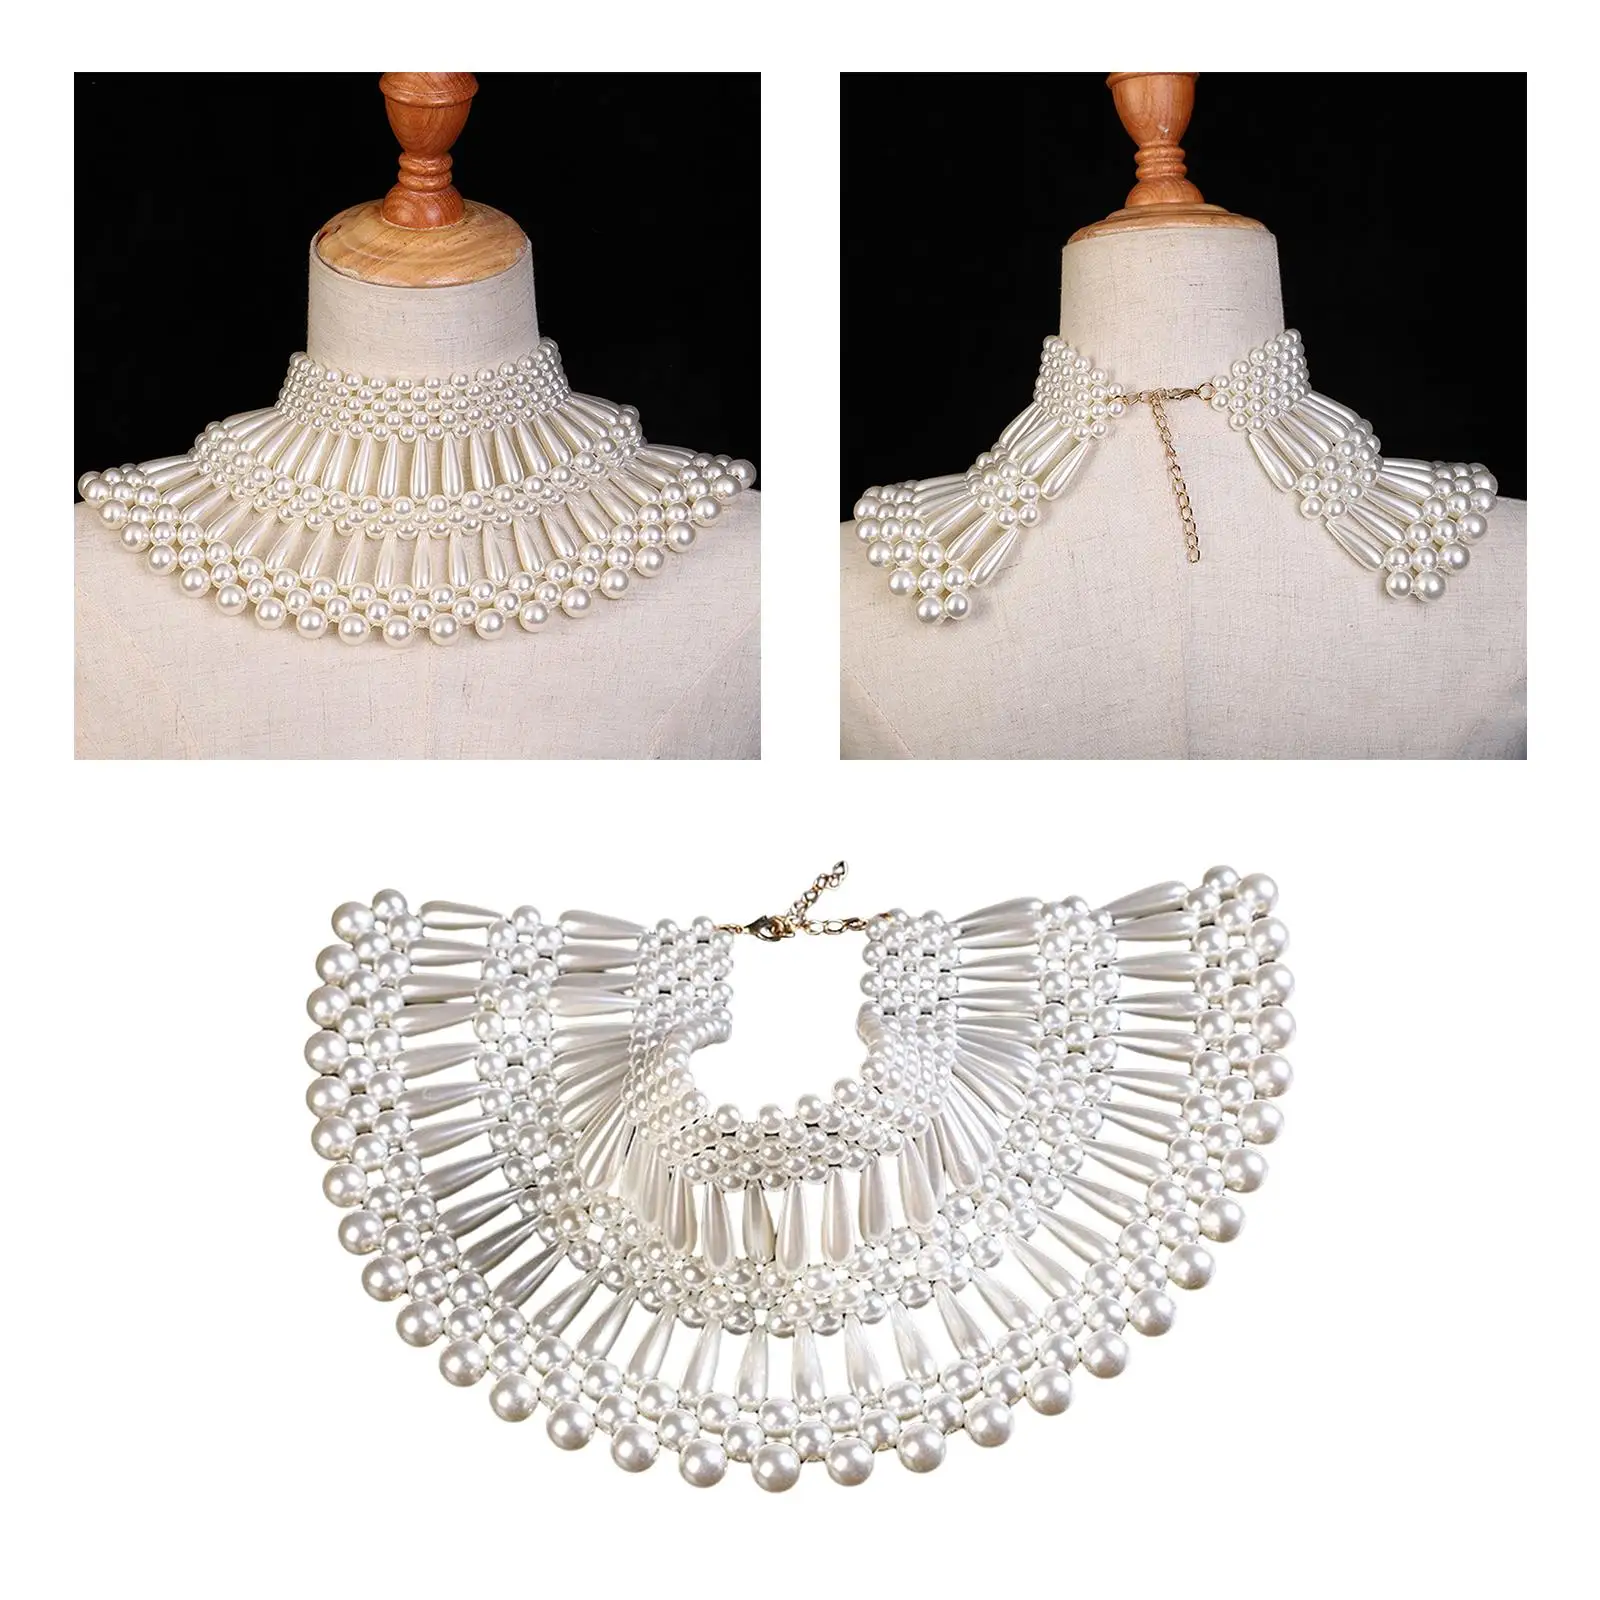 Simulated Pearl Necklace for Women, Body Statement Jewelry, Fashion Collar Bib Necklace Costume